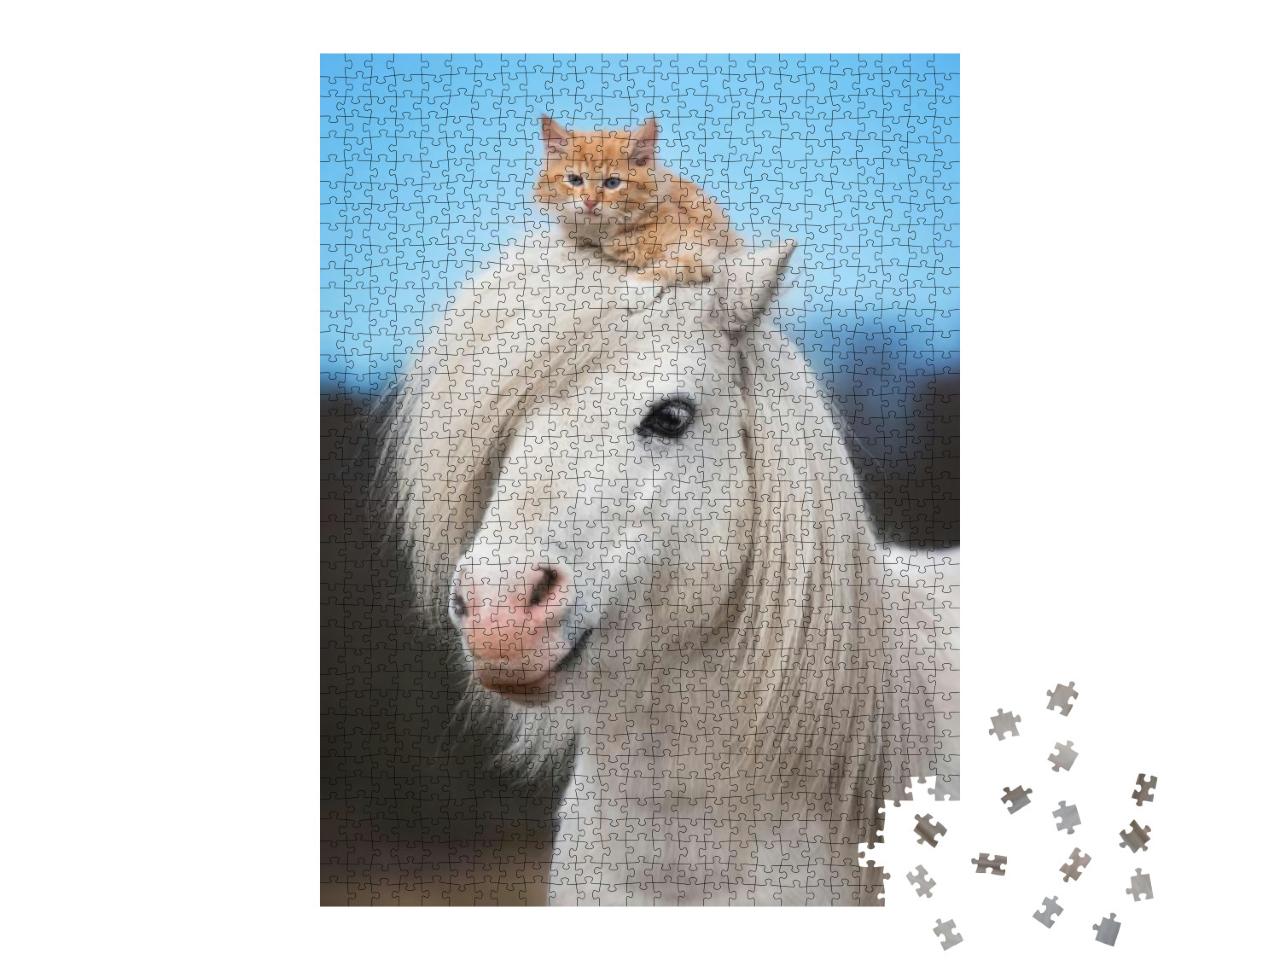 Little Red Kitten Sitting on the Head of White Shetland P... Jigsaw Puzzle with 1000 pieces